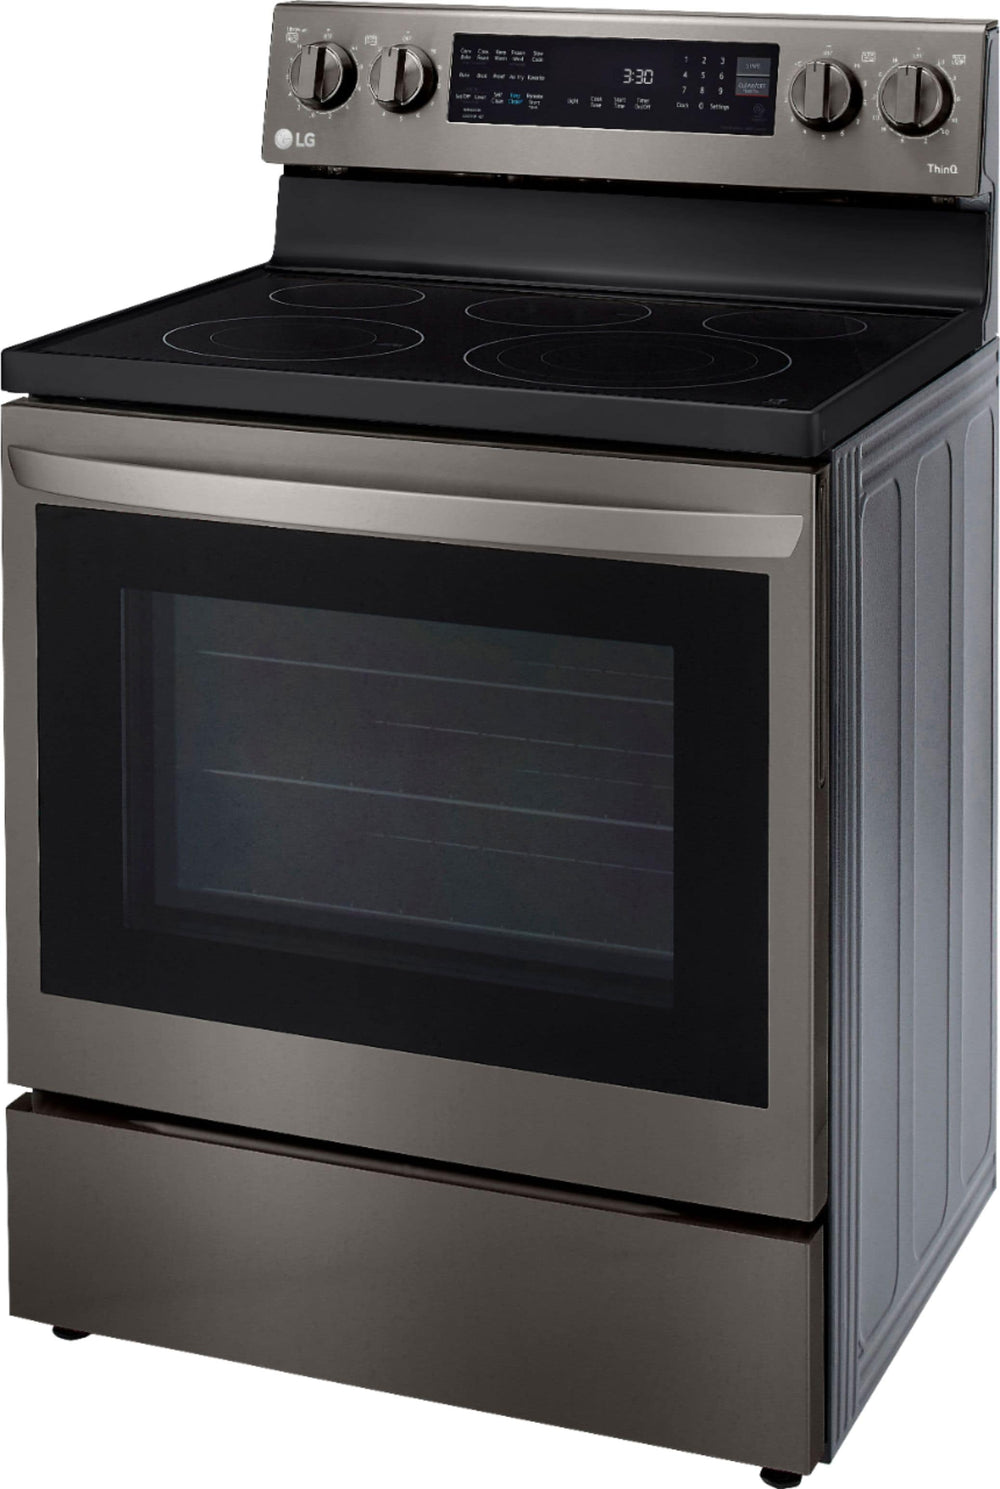 LG - 6.3 Cu. Ft. Smart Freestanding Electric Convection Range with EasyClean, Air Fry and InstaView - Black stainless steel_1